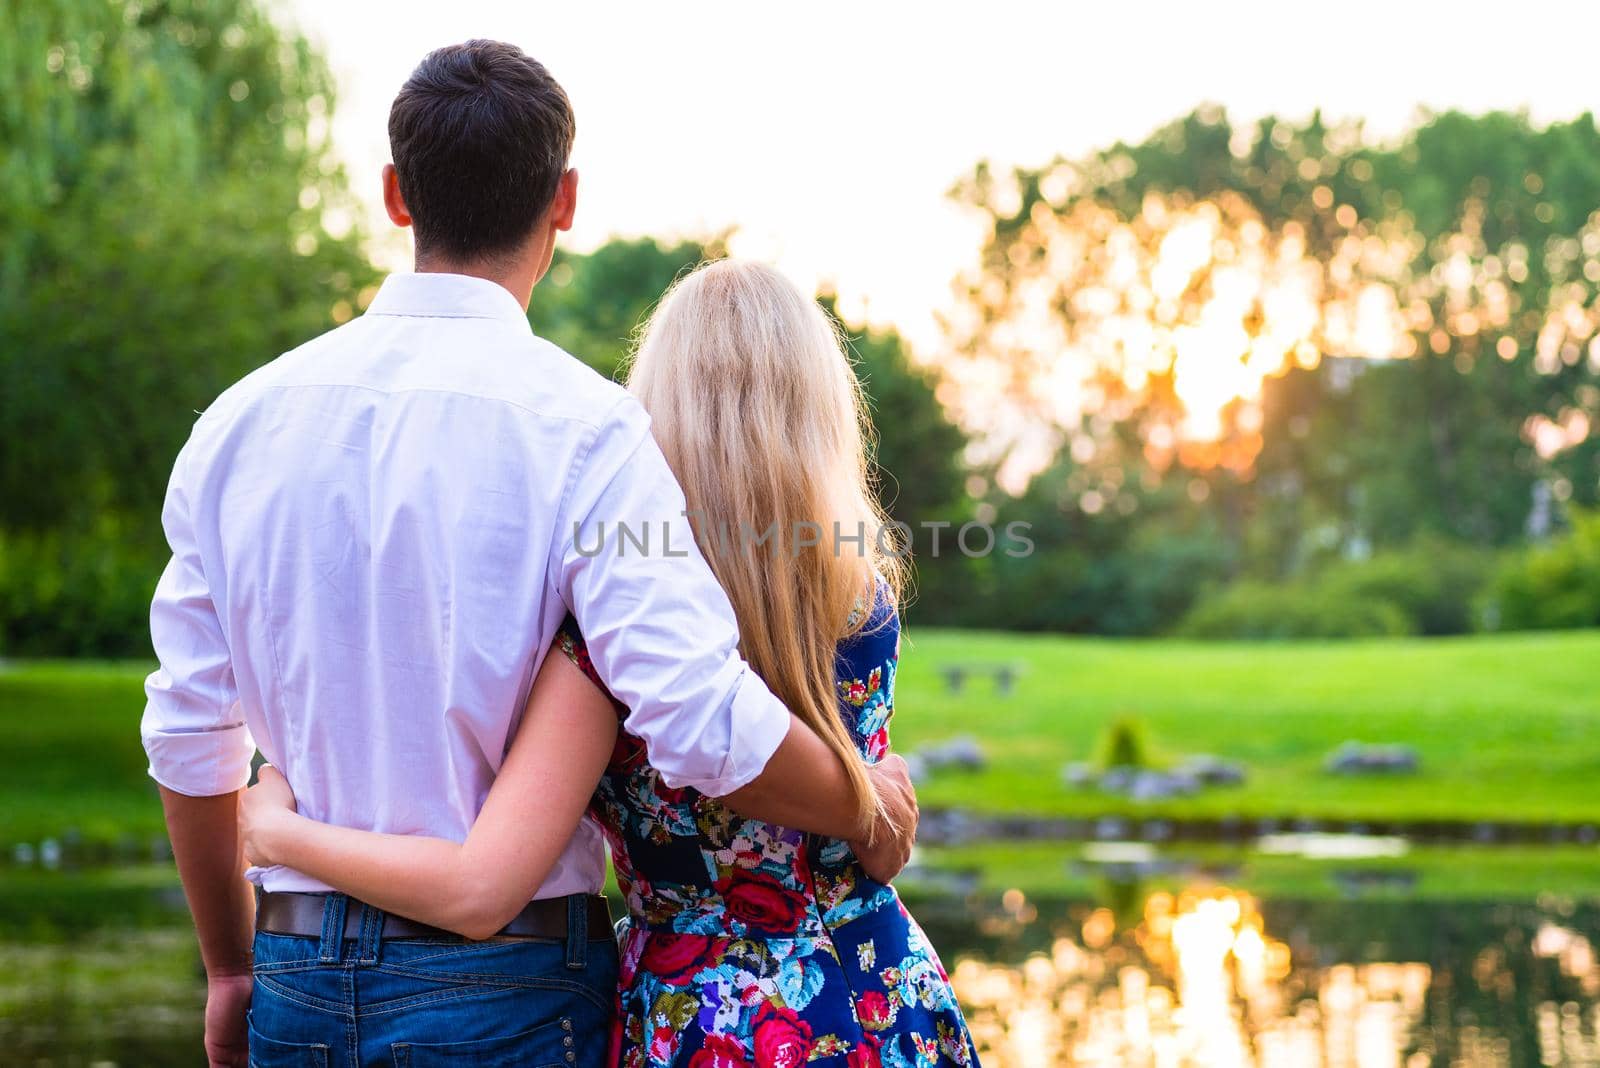 Couple dreaming their life together looking in romantic sunset, man embracing his girlfriend